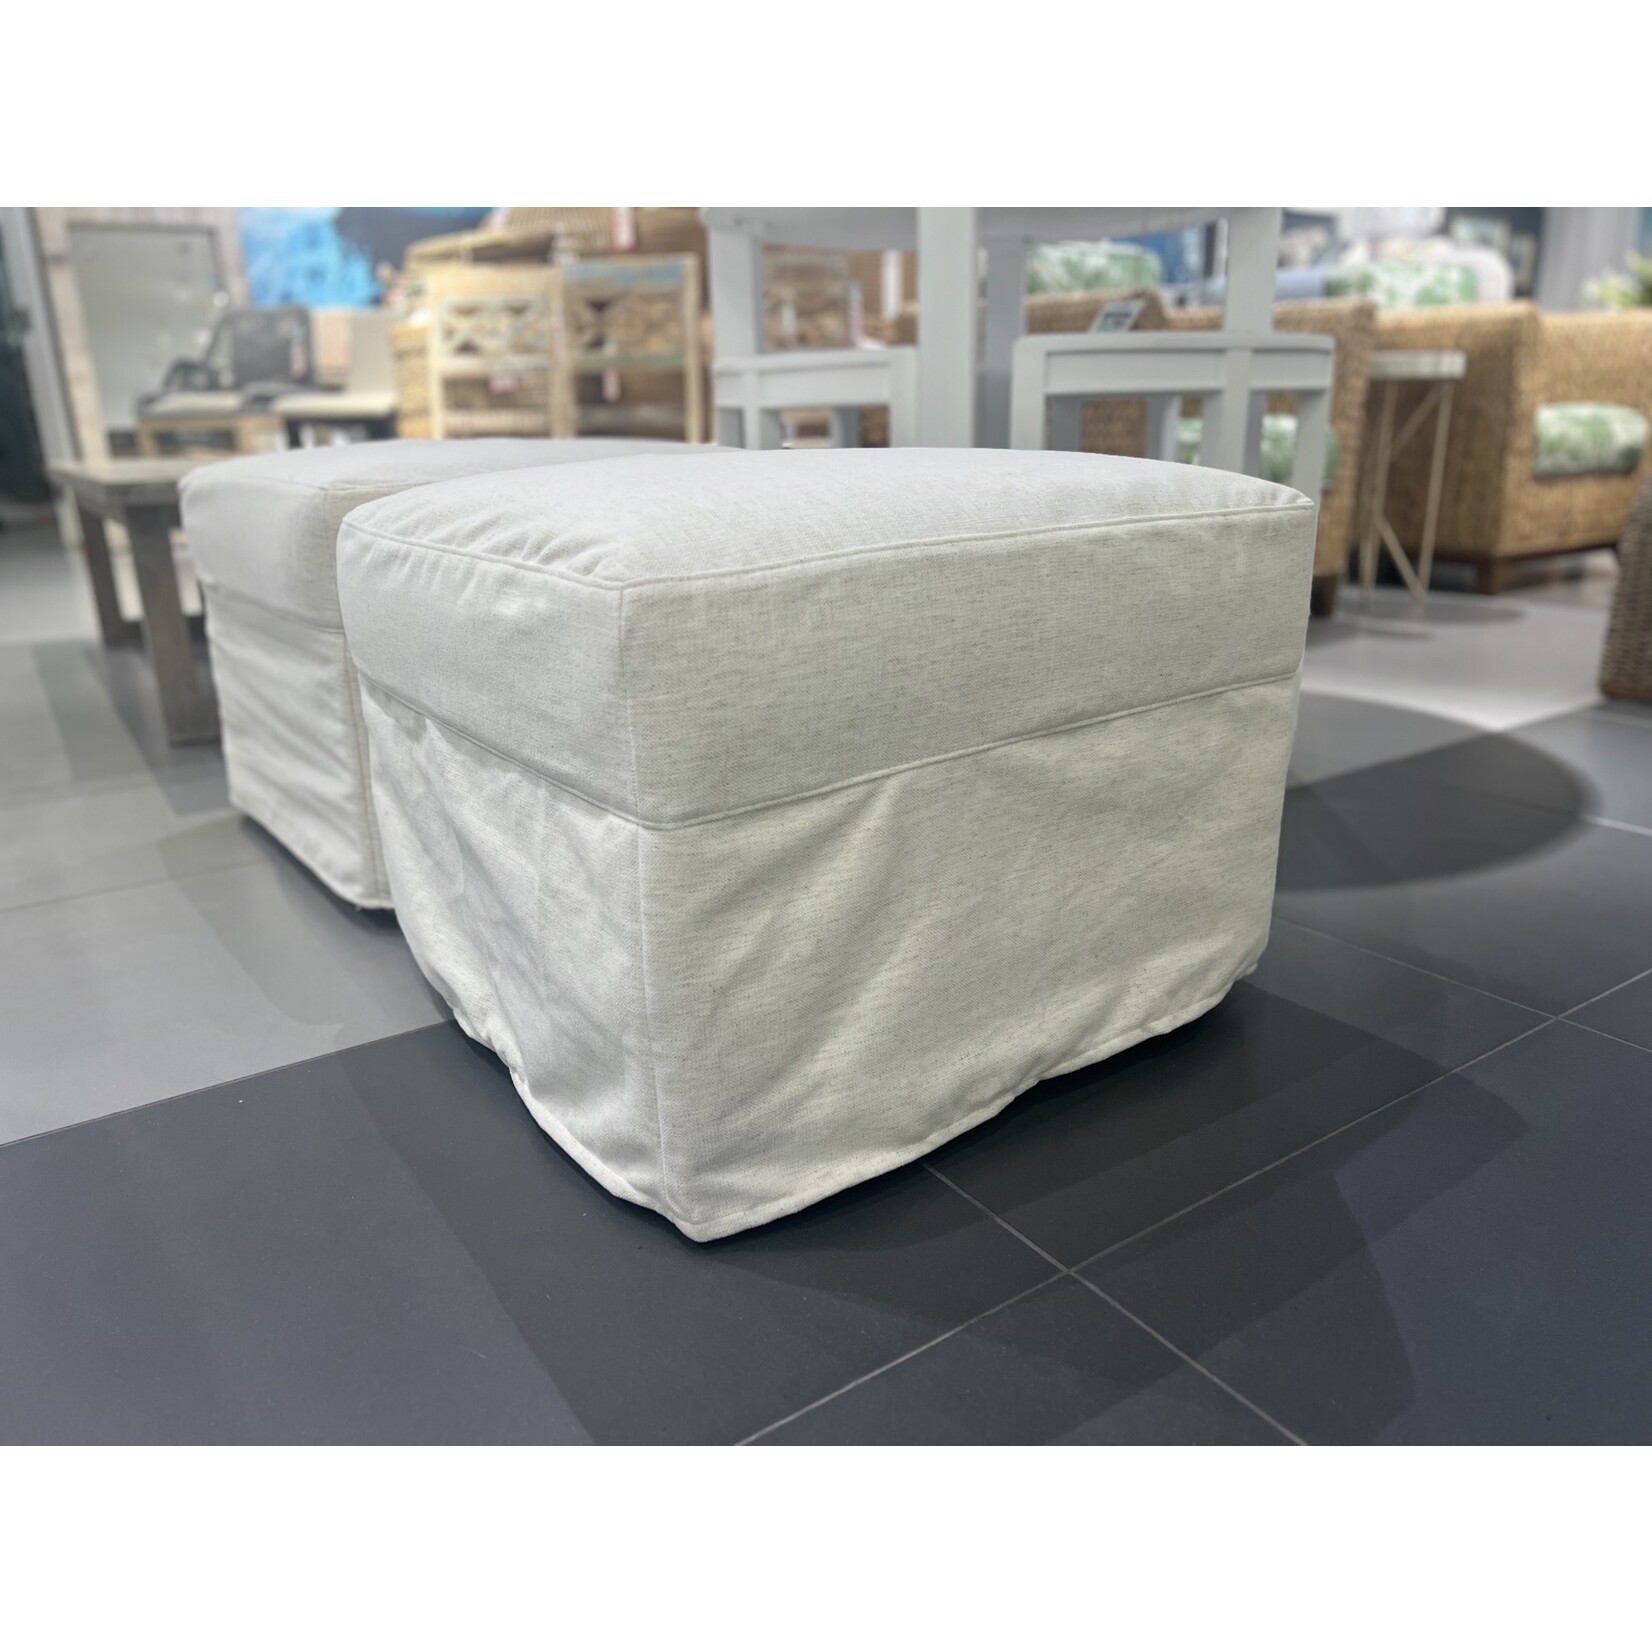 Outside The Box 24x24 Harper Nomad Snow Crypton Performance Slipcover Ottoman With Locking Castors